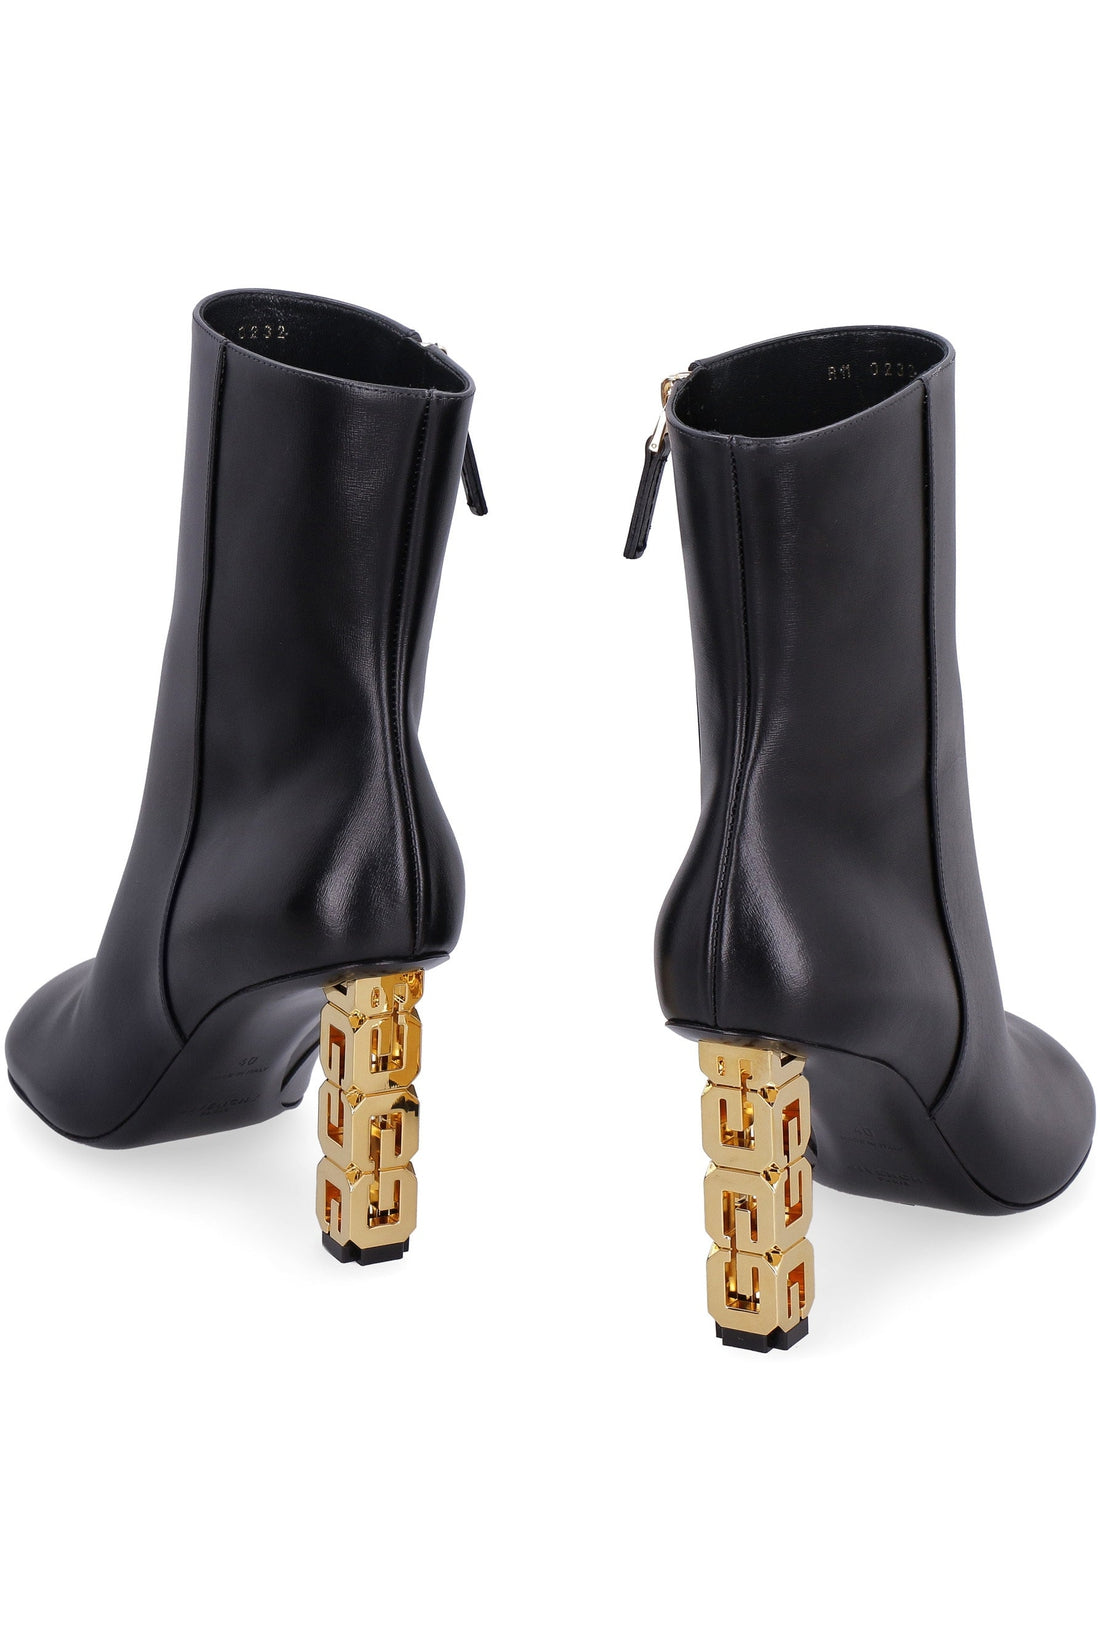 Givenchy-OUTLET-SALE-G-Cube leather ankle boots-ARCHIVIST